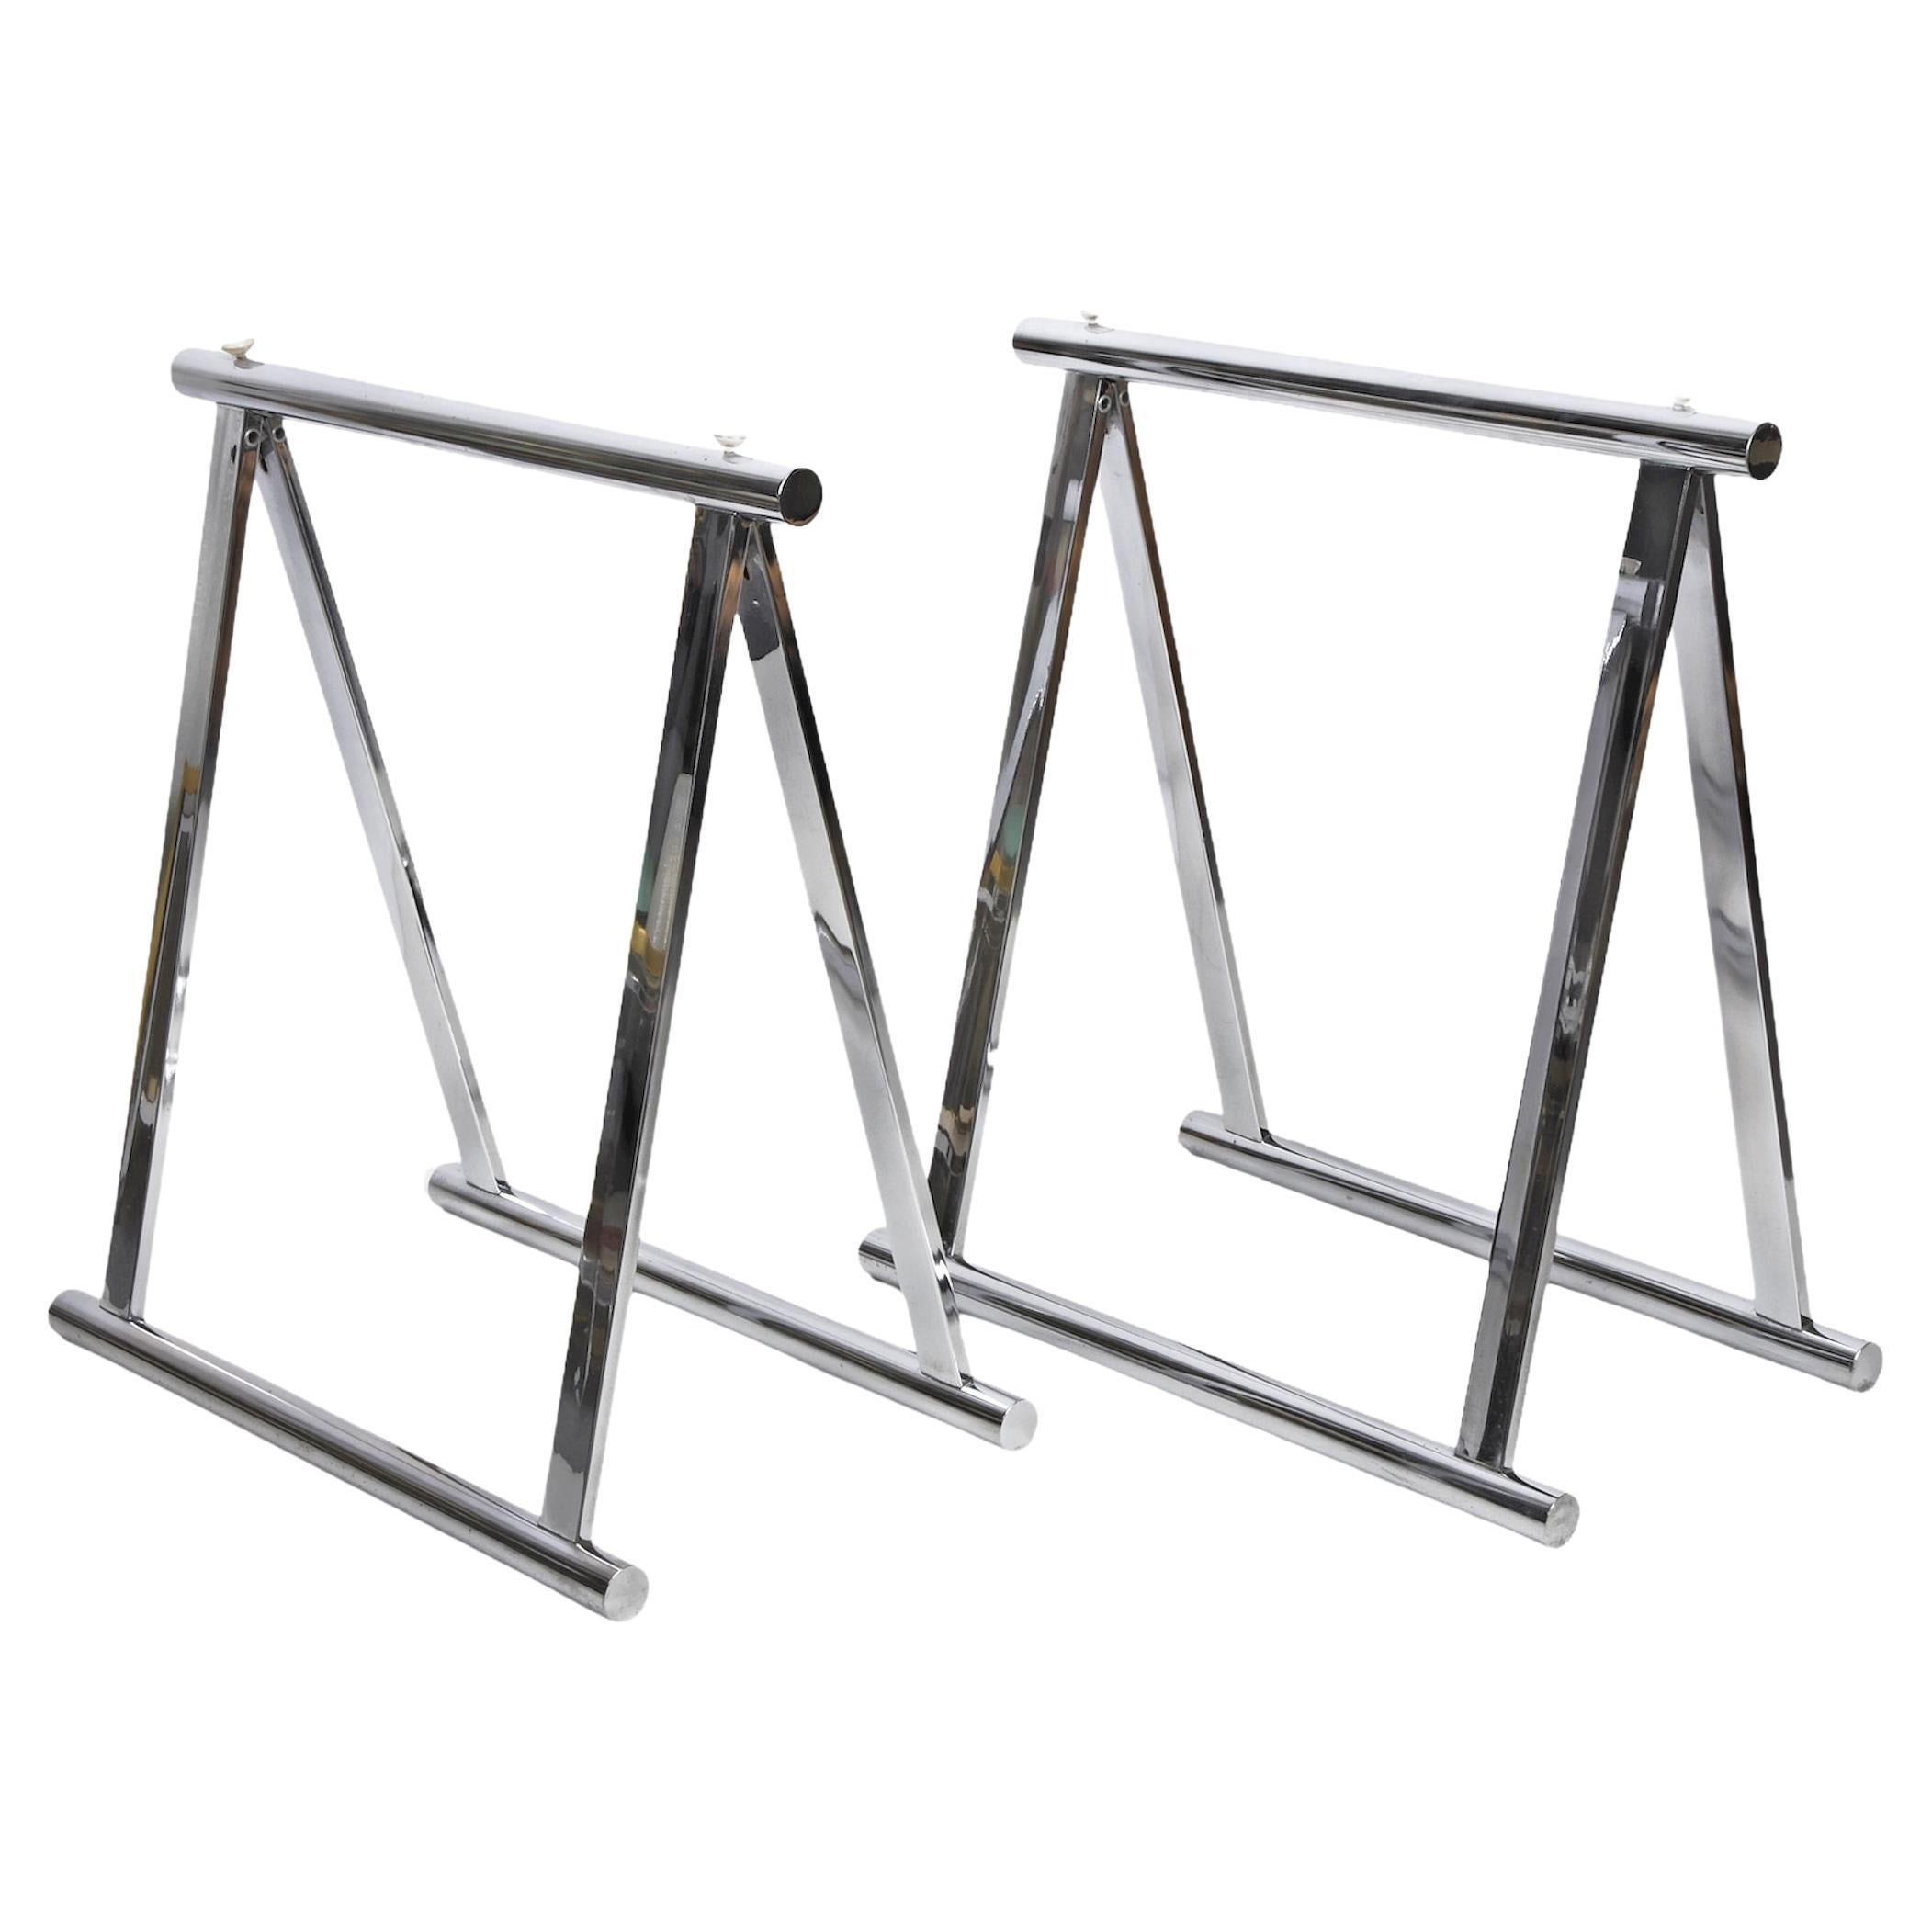 Wonderful pair of midcentury four-legs chromed steel trestles. These amazing pieces were designed in Italy after Milo Baughman during the 1970s.

These items are very versatile and will be perfect for creating a table or a desk because of their